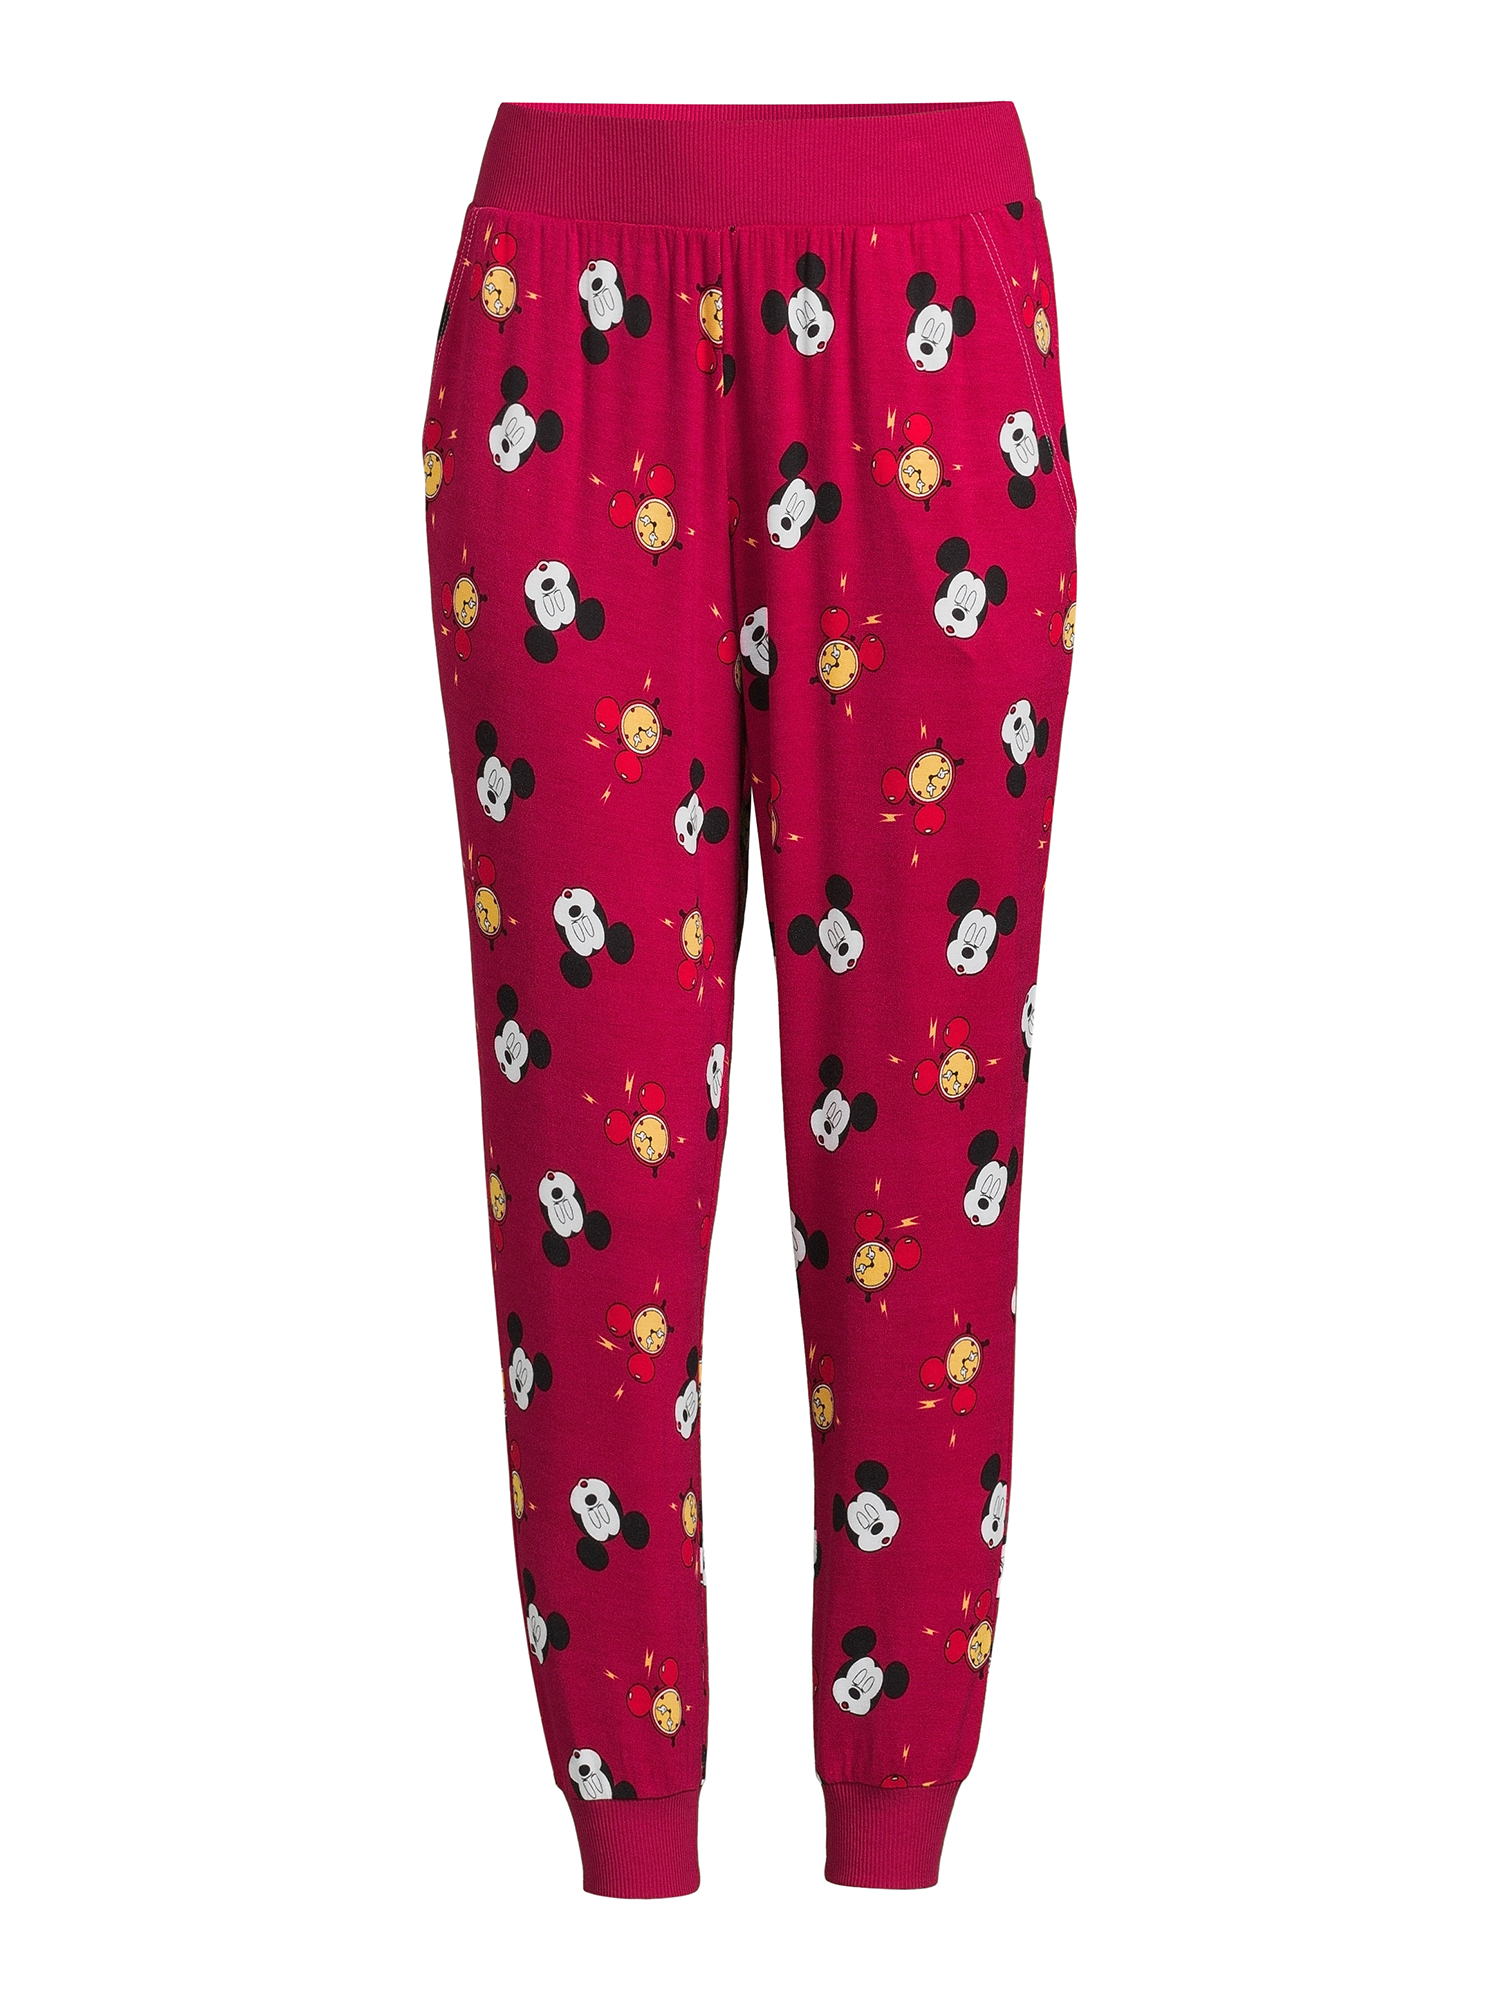 Disney Printed Breathable Easy Care Pajamas (Women's) 1 Pack - image 5 of 7